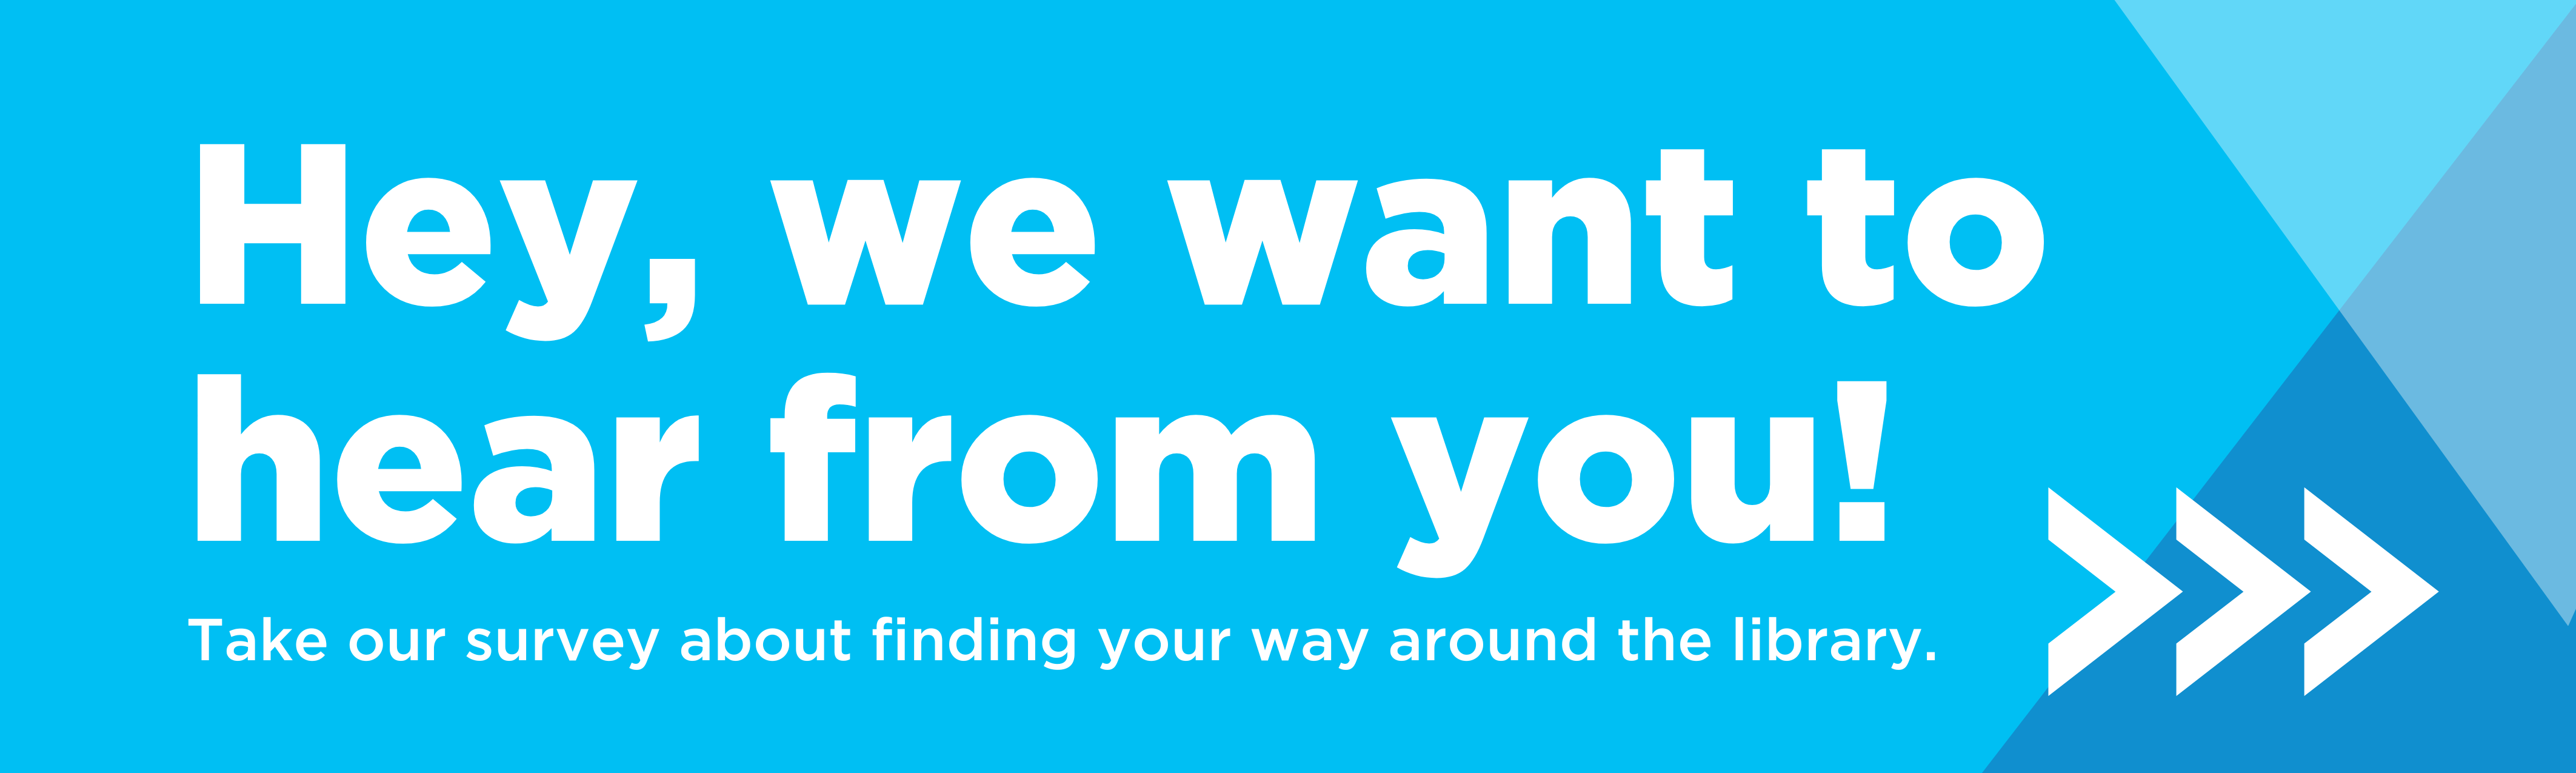 Hey, we want to hear from you! Please take our survey on finding your way around the library.